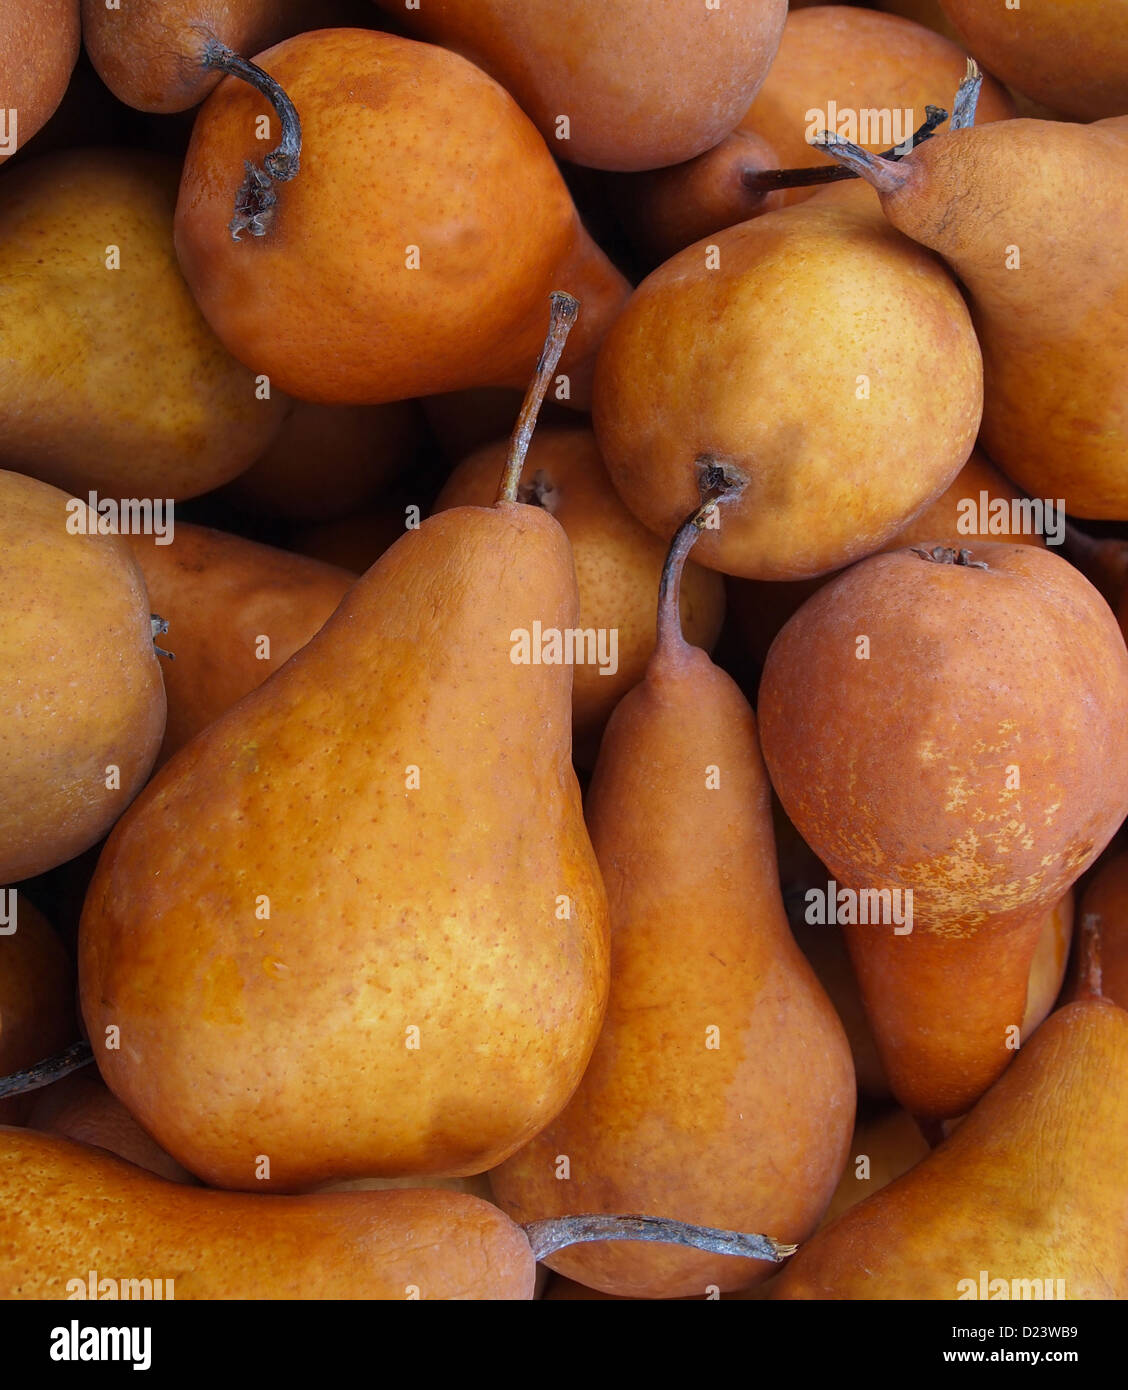 A crate of large, ripe, golden colored, organic Bosc pears for sale at the farmer's market. Stock Photo